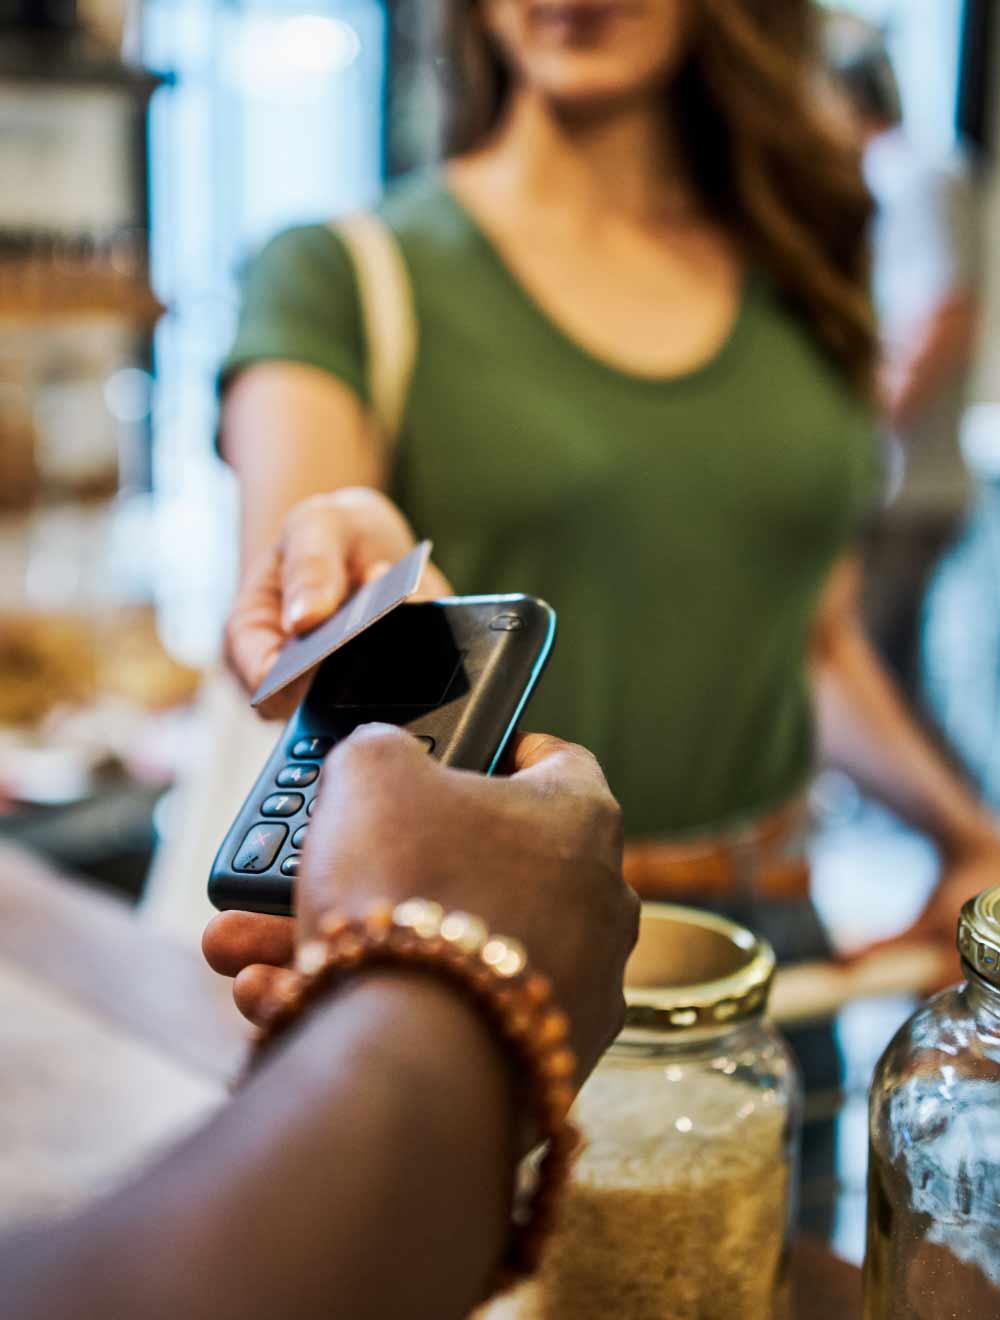 Image of women tapping her card on a credit card reader at a store